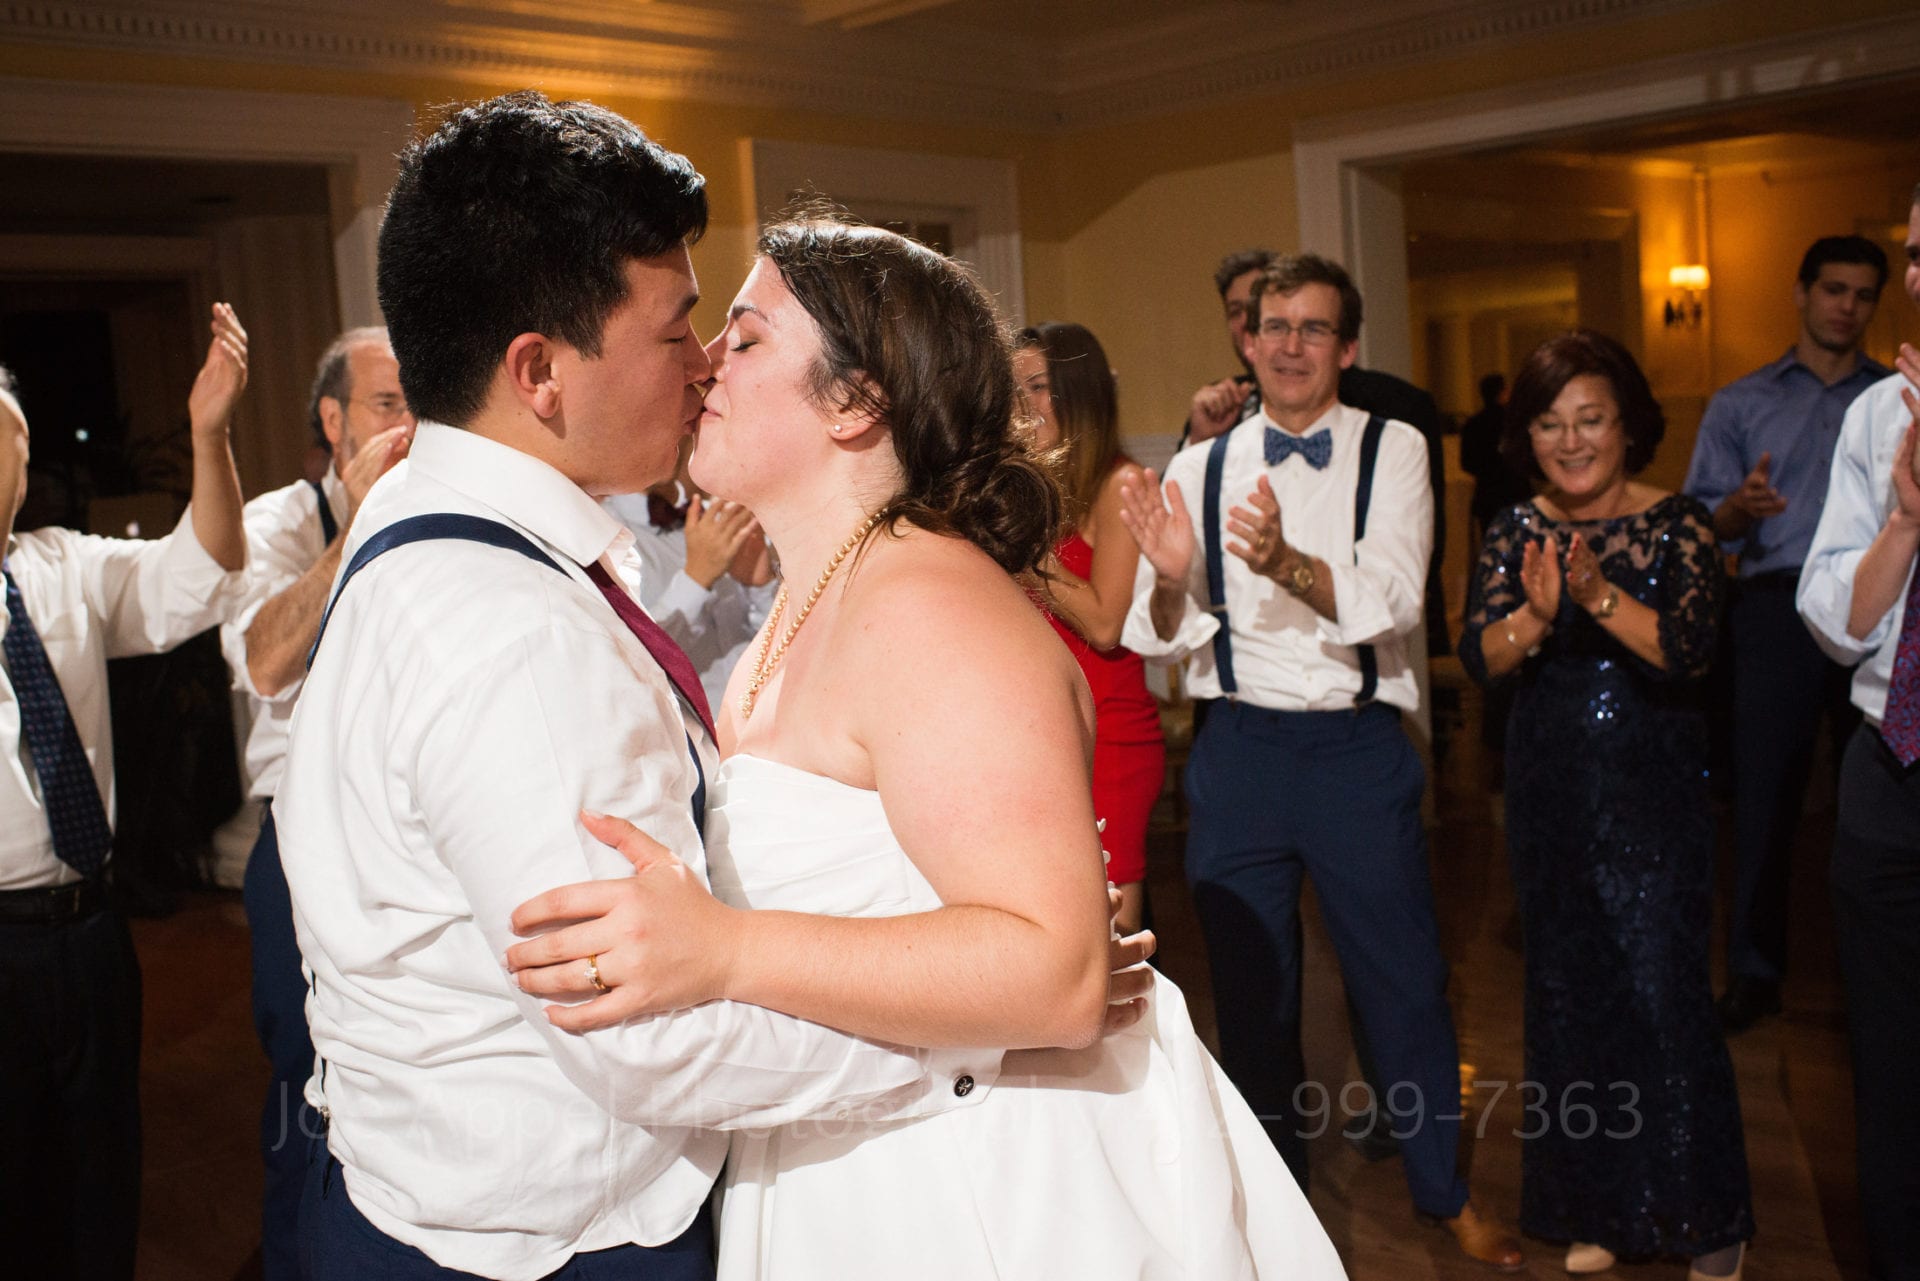 guests applaud a bride and groom as they kiss and dance